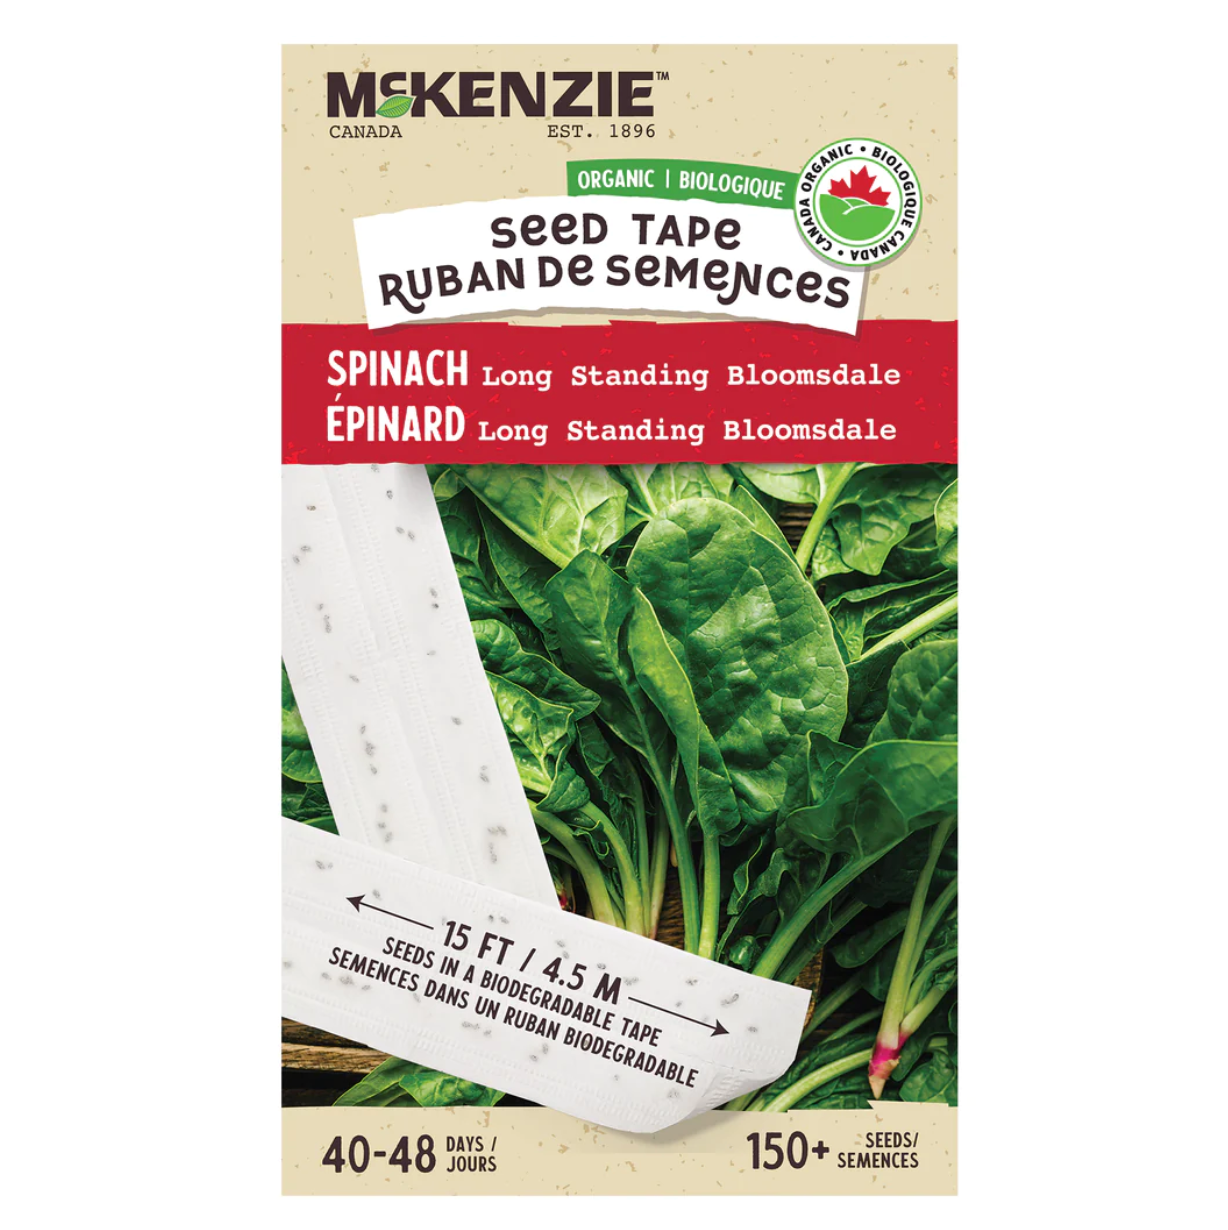 Spinach Bloomsdale Organic Seed Tape